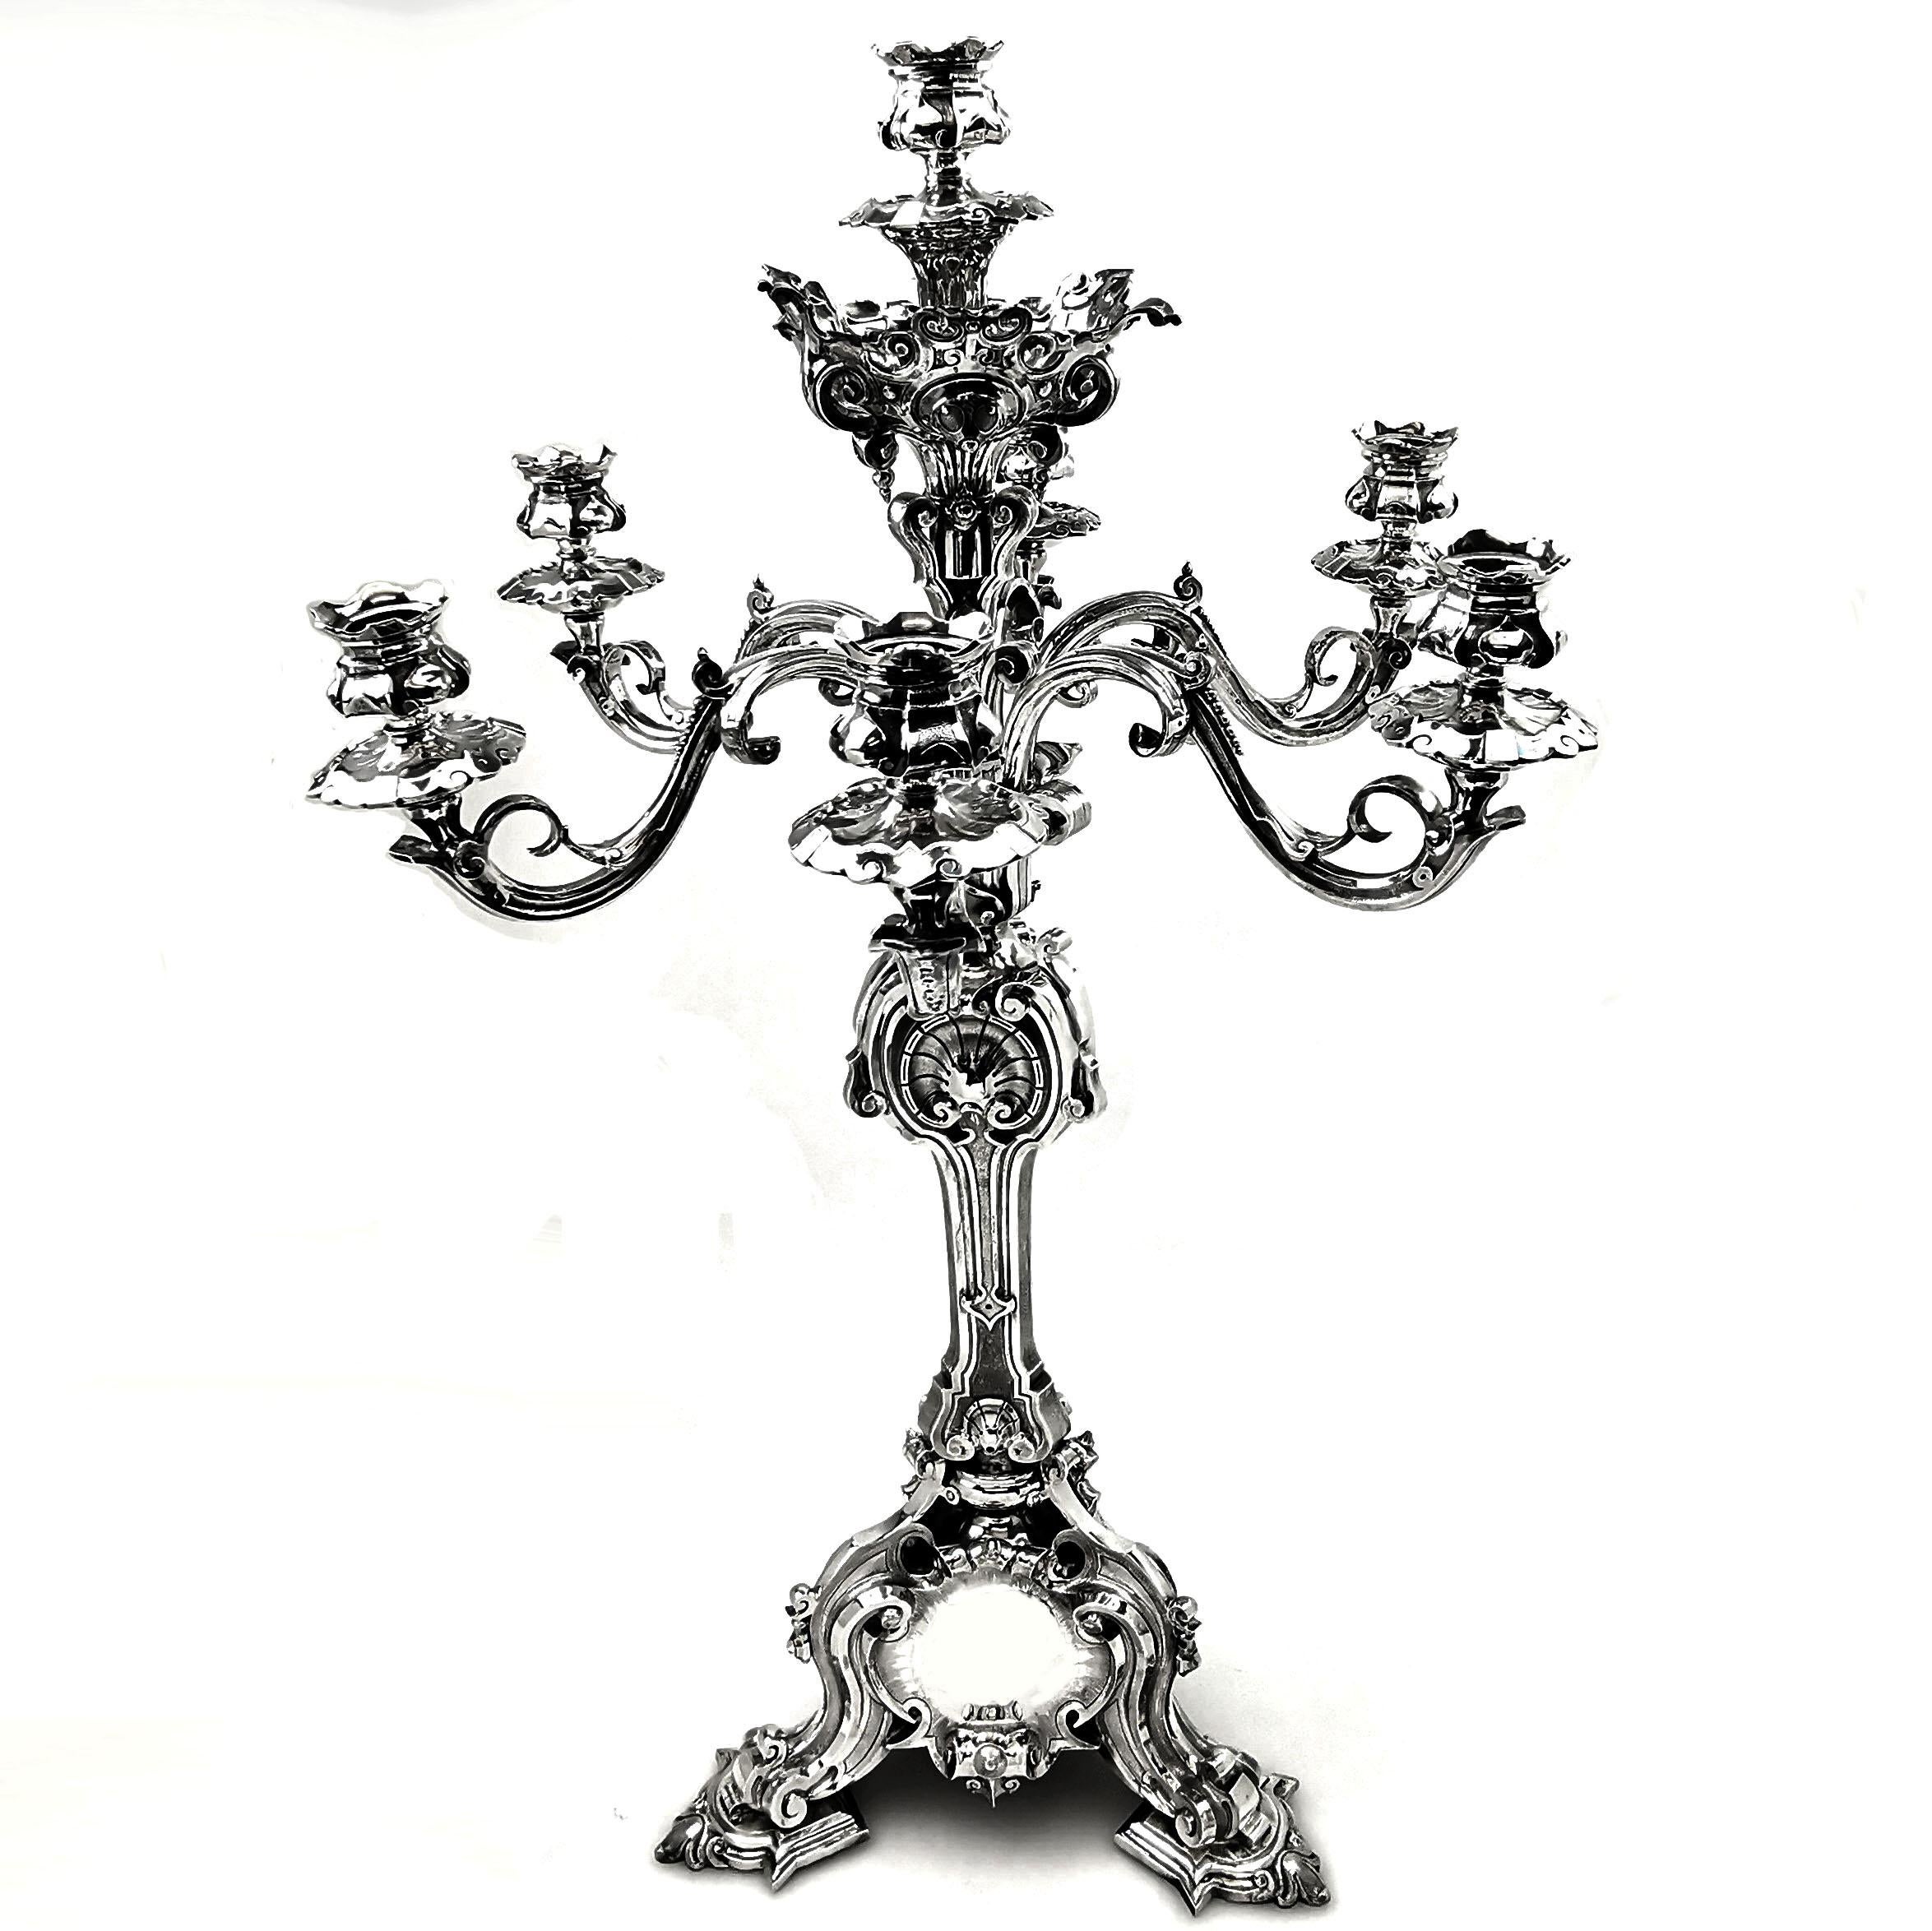 A magnificent antique Victorian sterling Silver Candelabrum. This Victorian Candelabrum stands on an impressive three footed base, with three circular cartouches. The branches of the Candelabrum are ornate scroll and leaf designs, and the column of